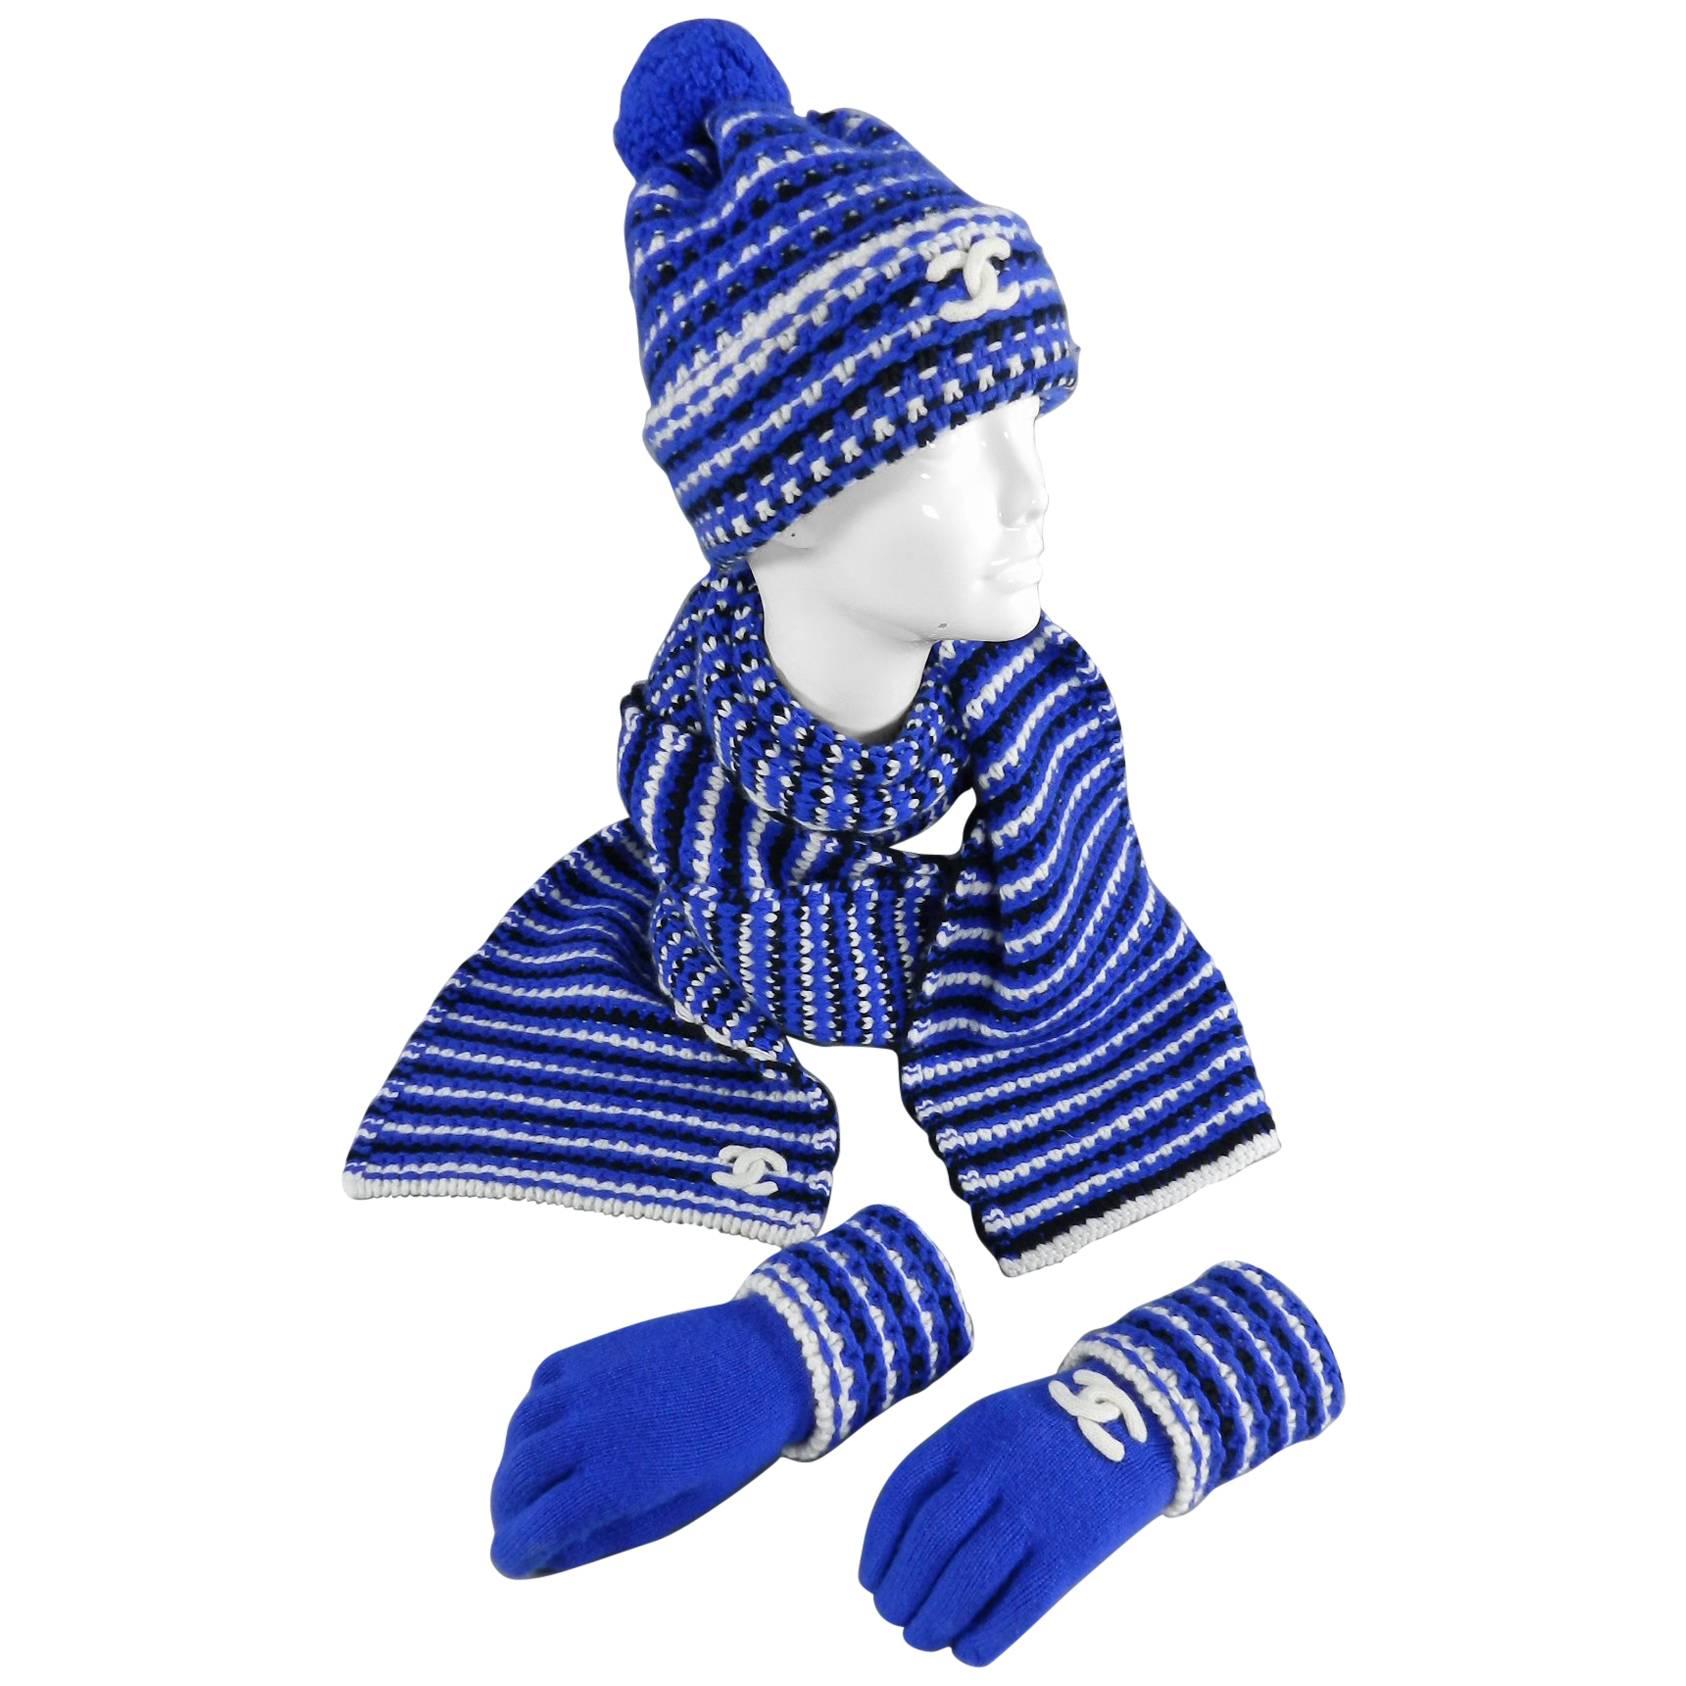 Chanel Fall 2014 Supermarket Blue and White Cashmere Knit Scarf Hat Gloves Set